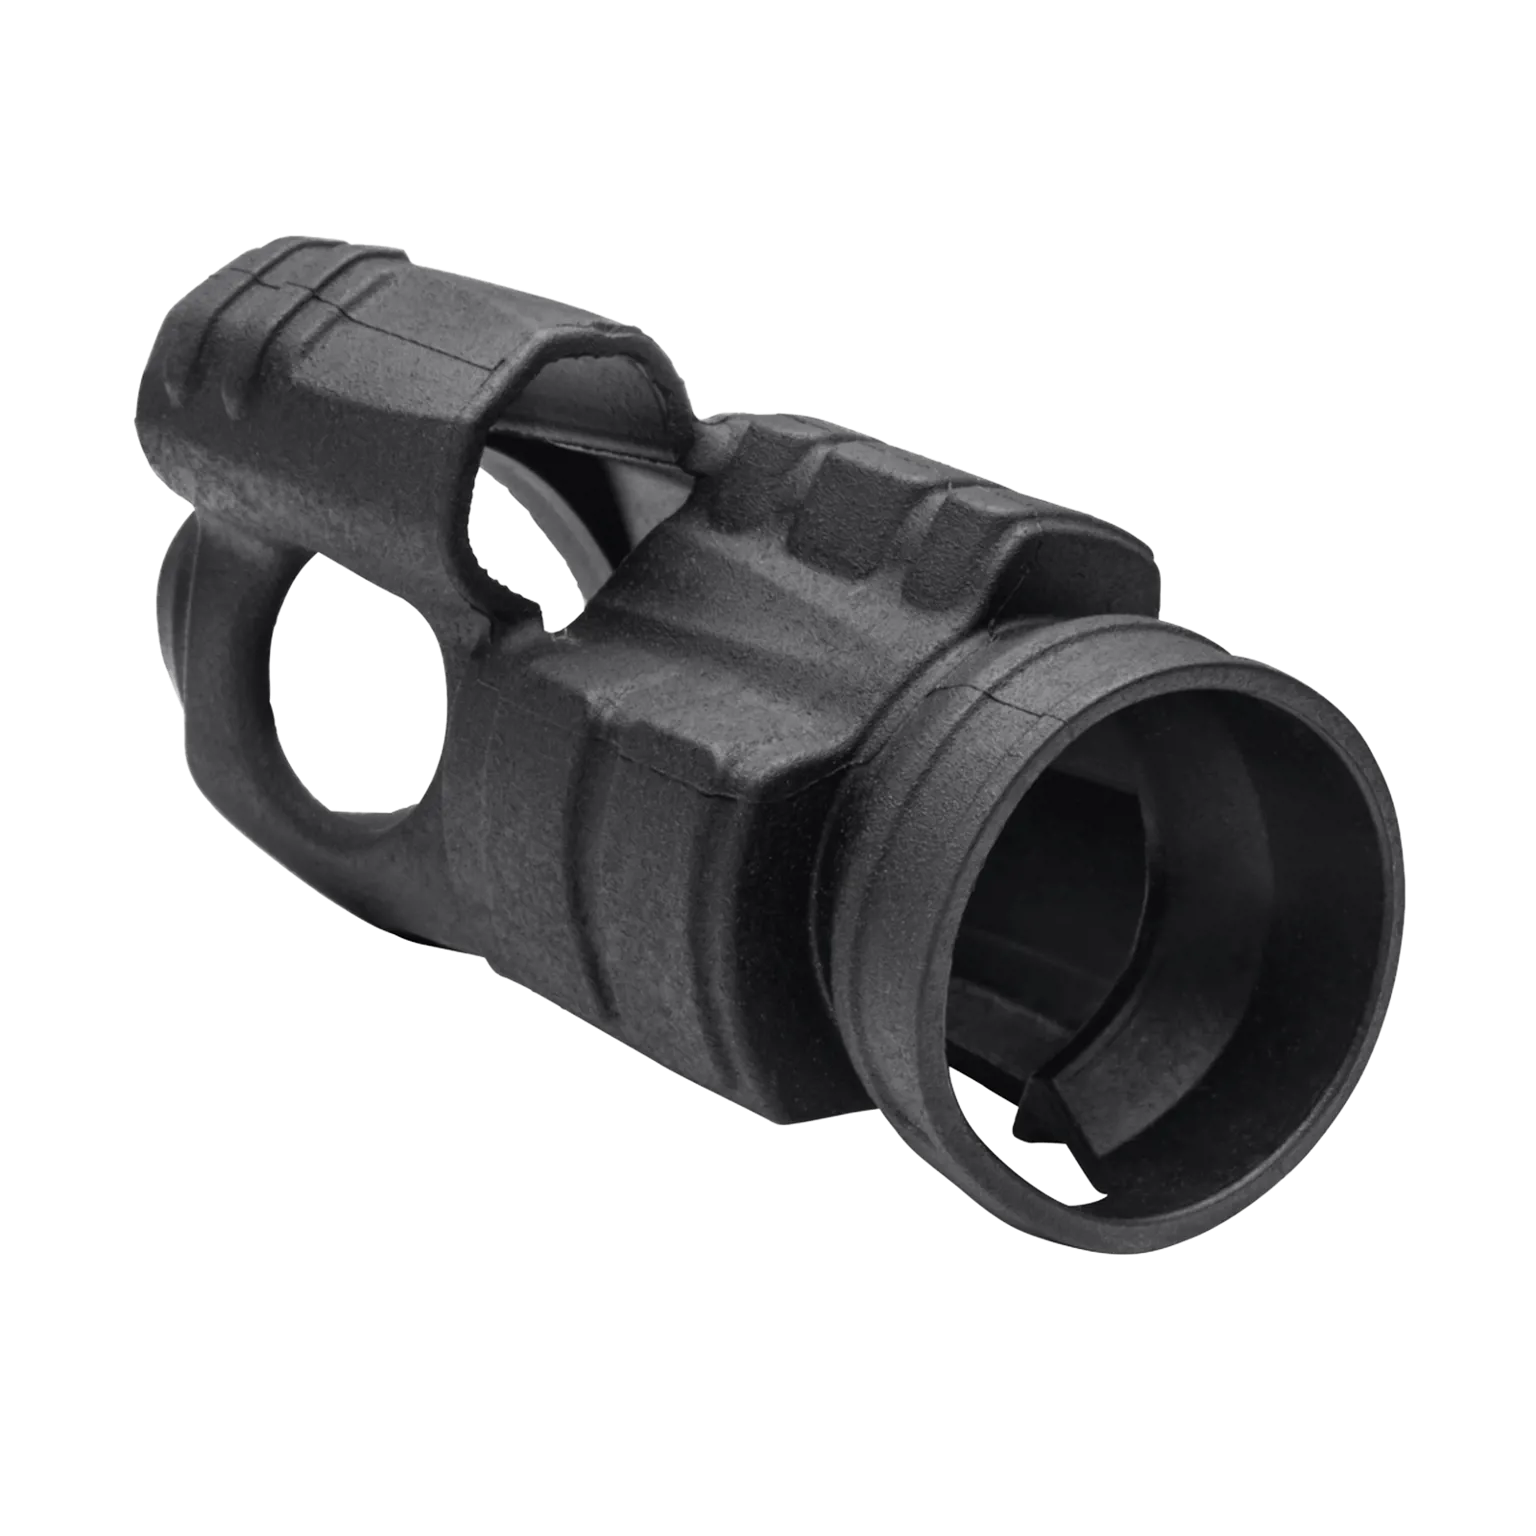 Outer rubber cover - Black for Aimpoint® CompM3/ML3  - 4